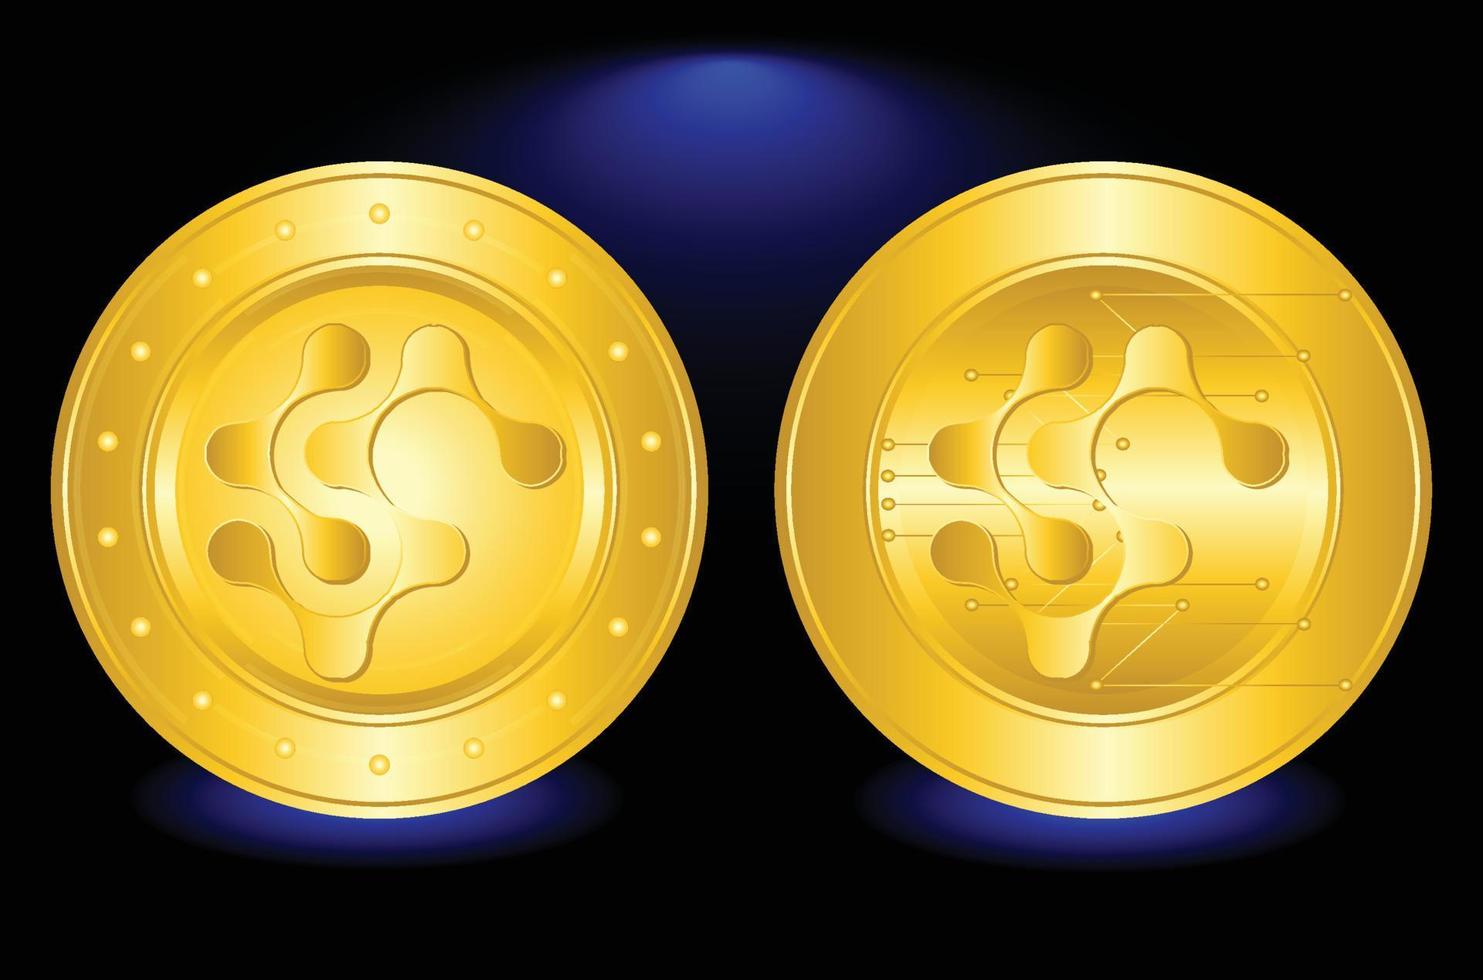 AMP gold coin crypto currency illustration vector